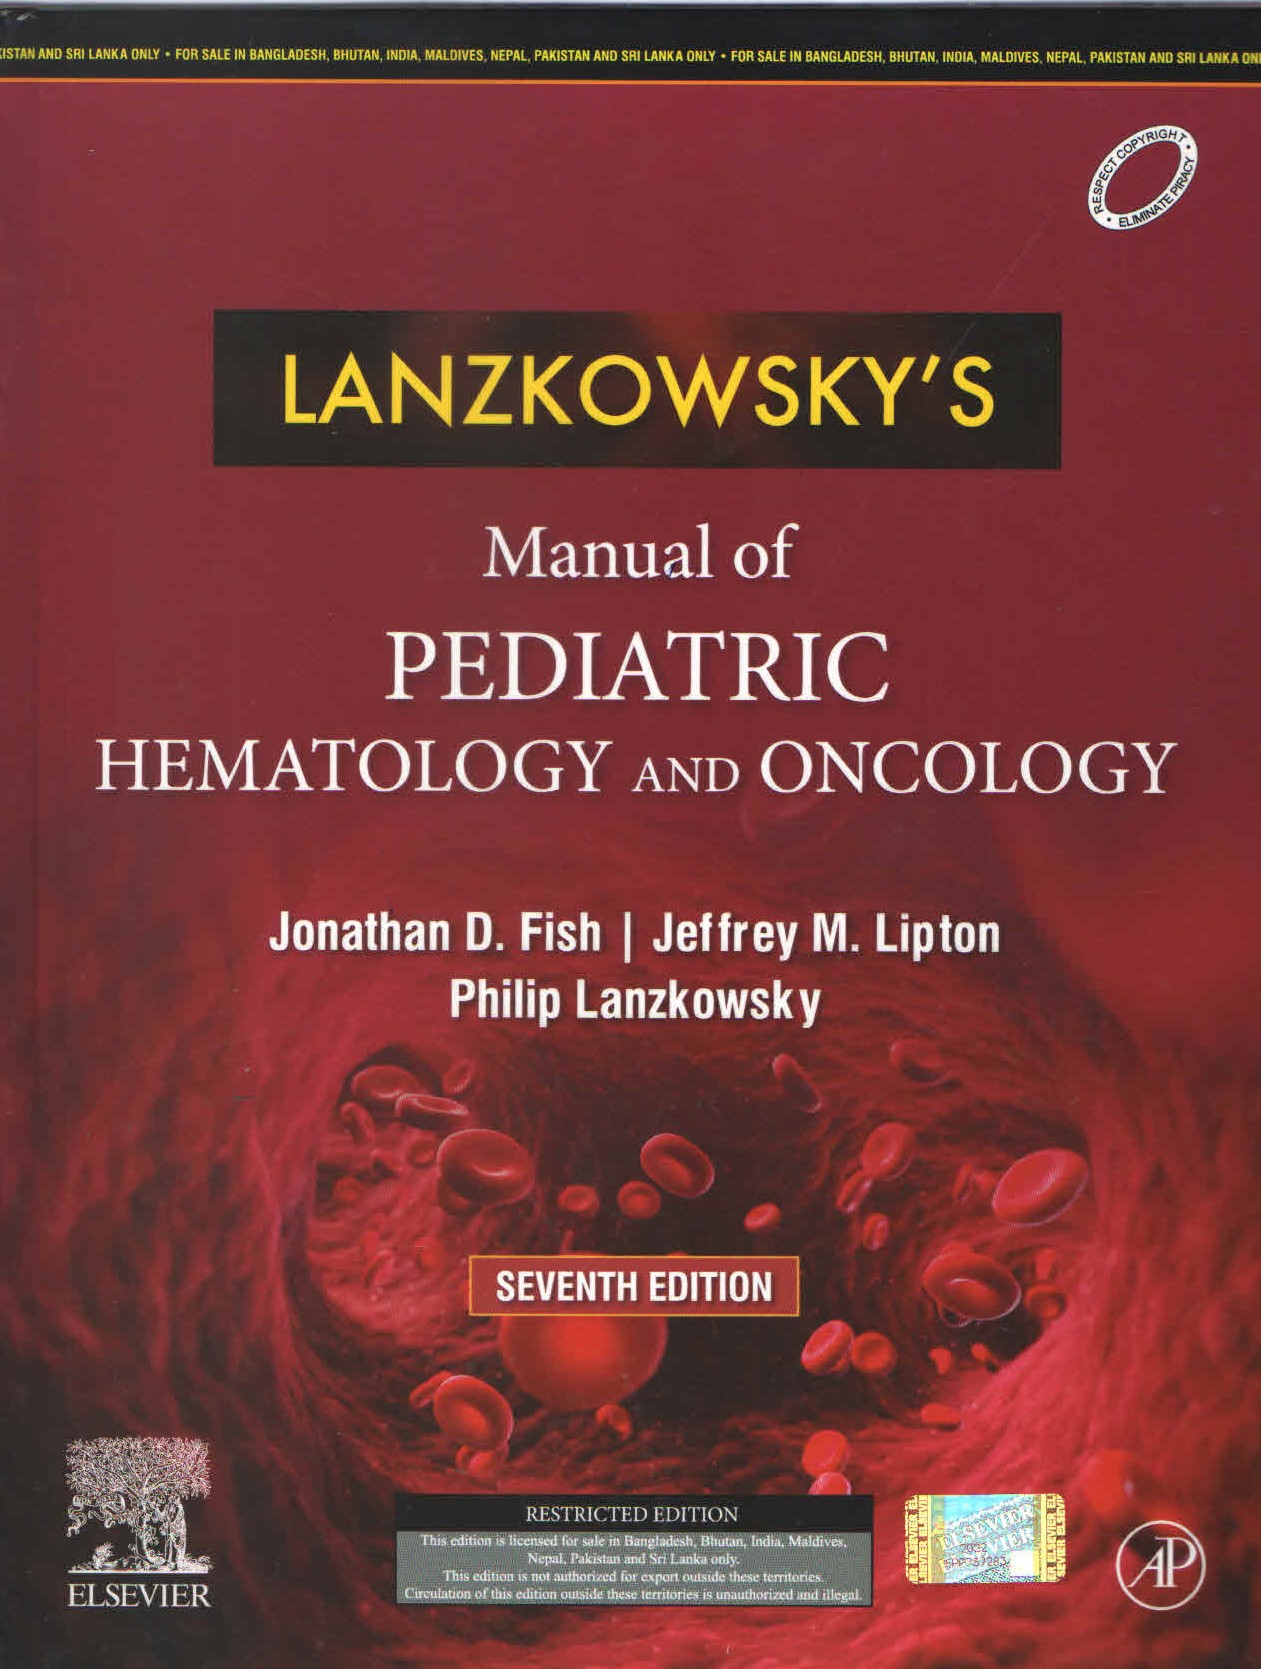 

general-books/general/lanzkowsky-s-manual-of-pediatric-hematology-and-oncology-7e-9788131267455